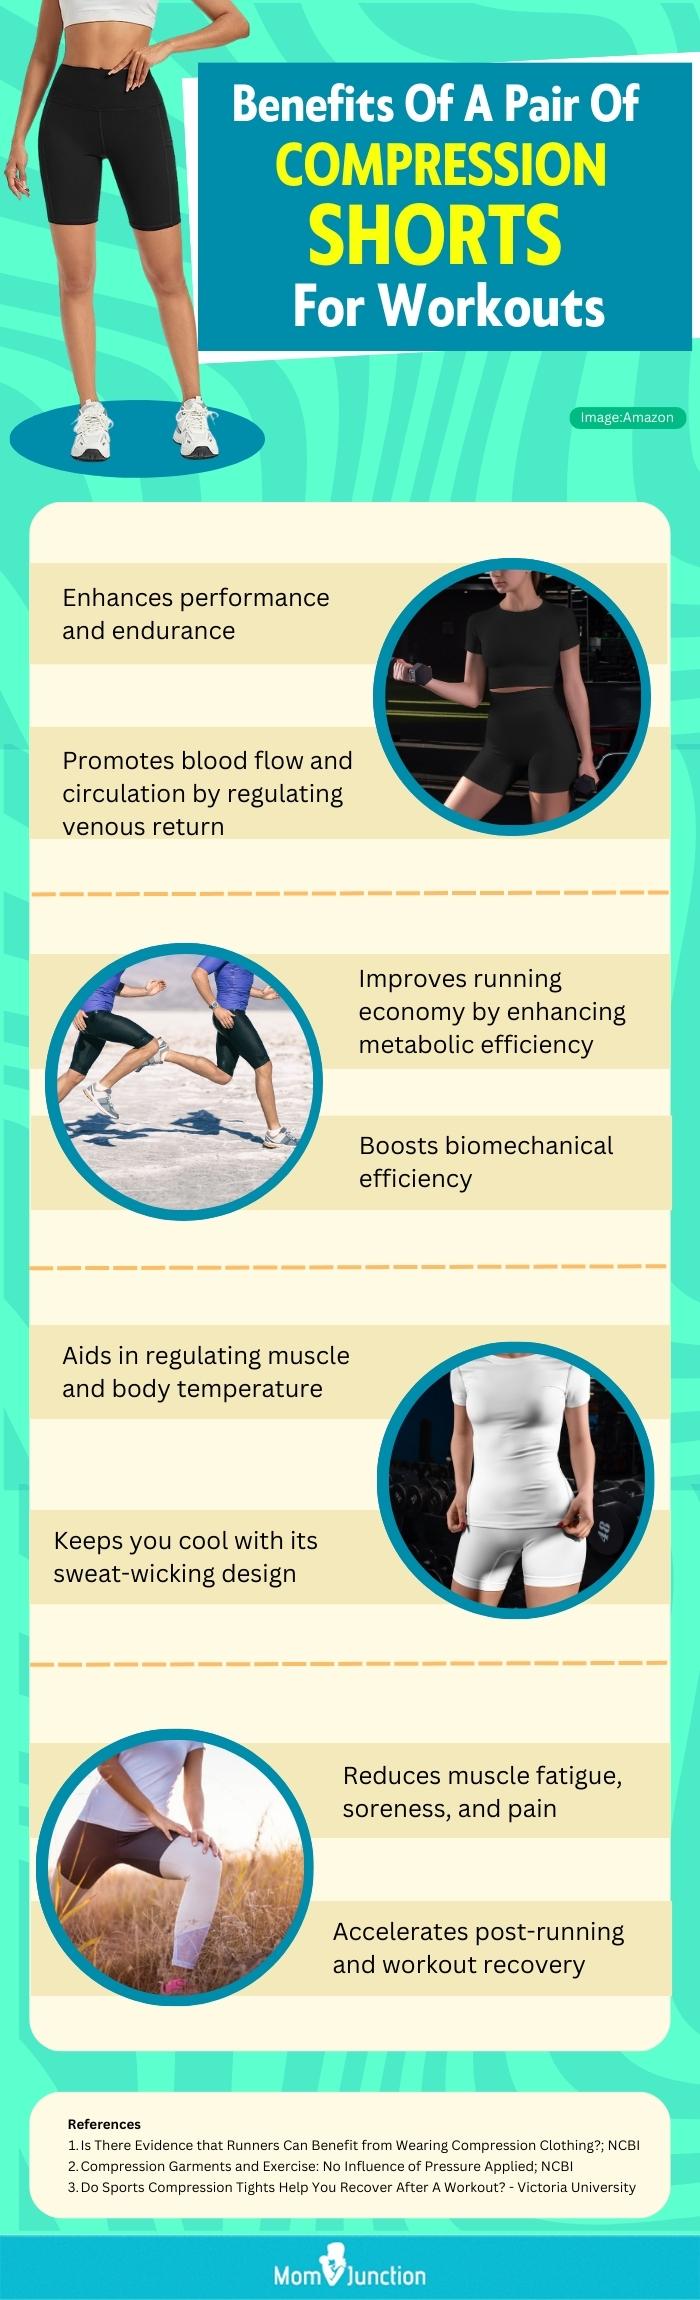 Benefits Of A Pair Of Compression Shorts For Workouts (infographic)